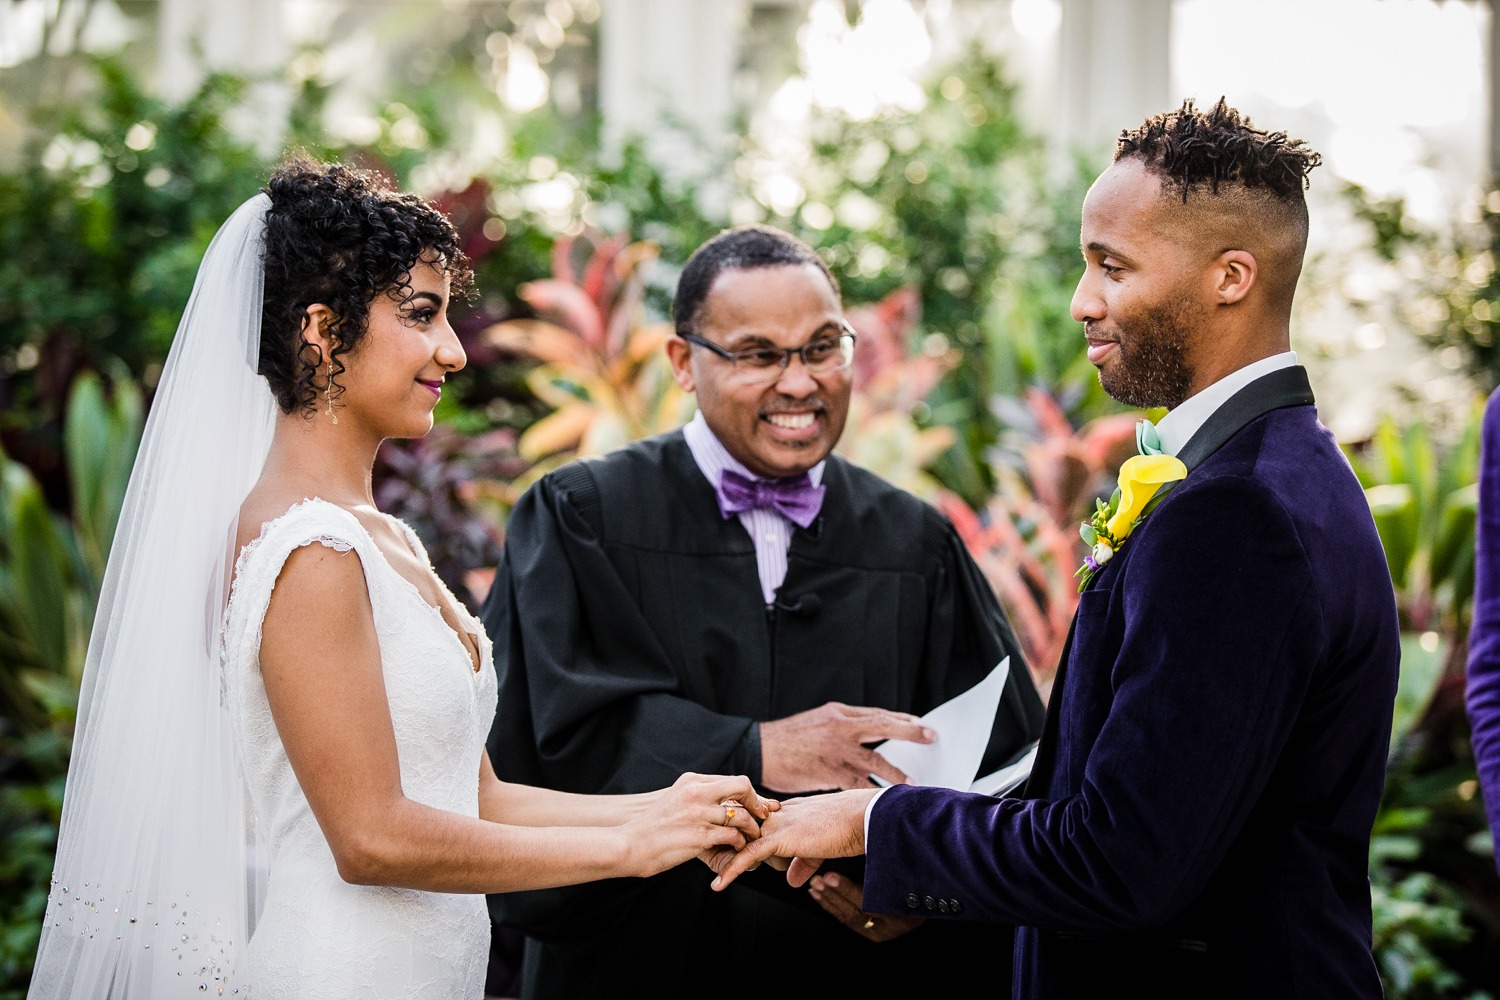 A couple exchanges rings during a Garfield Park Conservatory wedding.